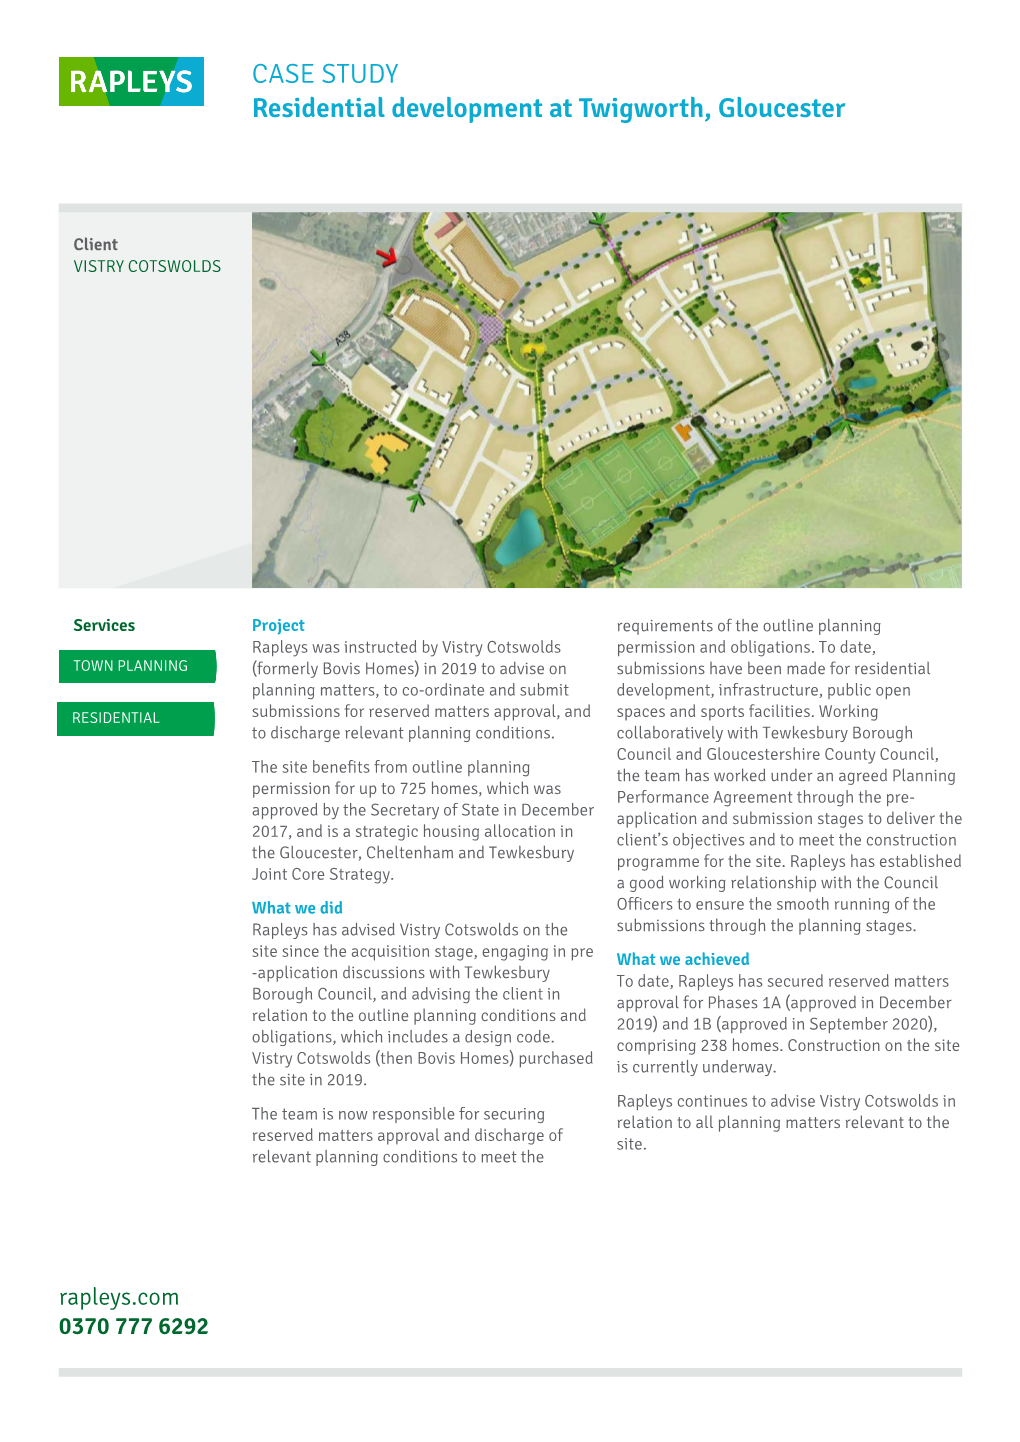 CASE STUDY Residential Development at Twigworth, Gloucester